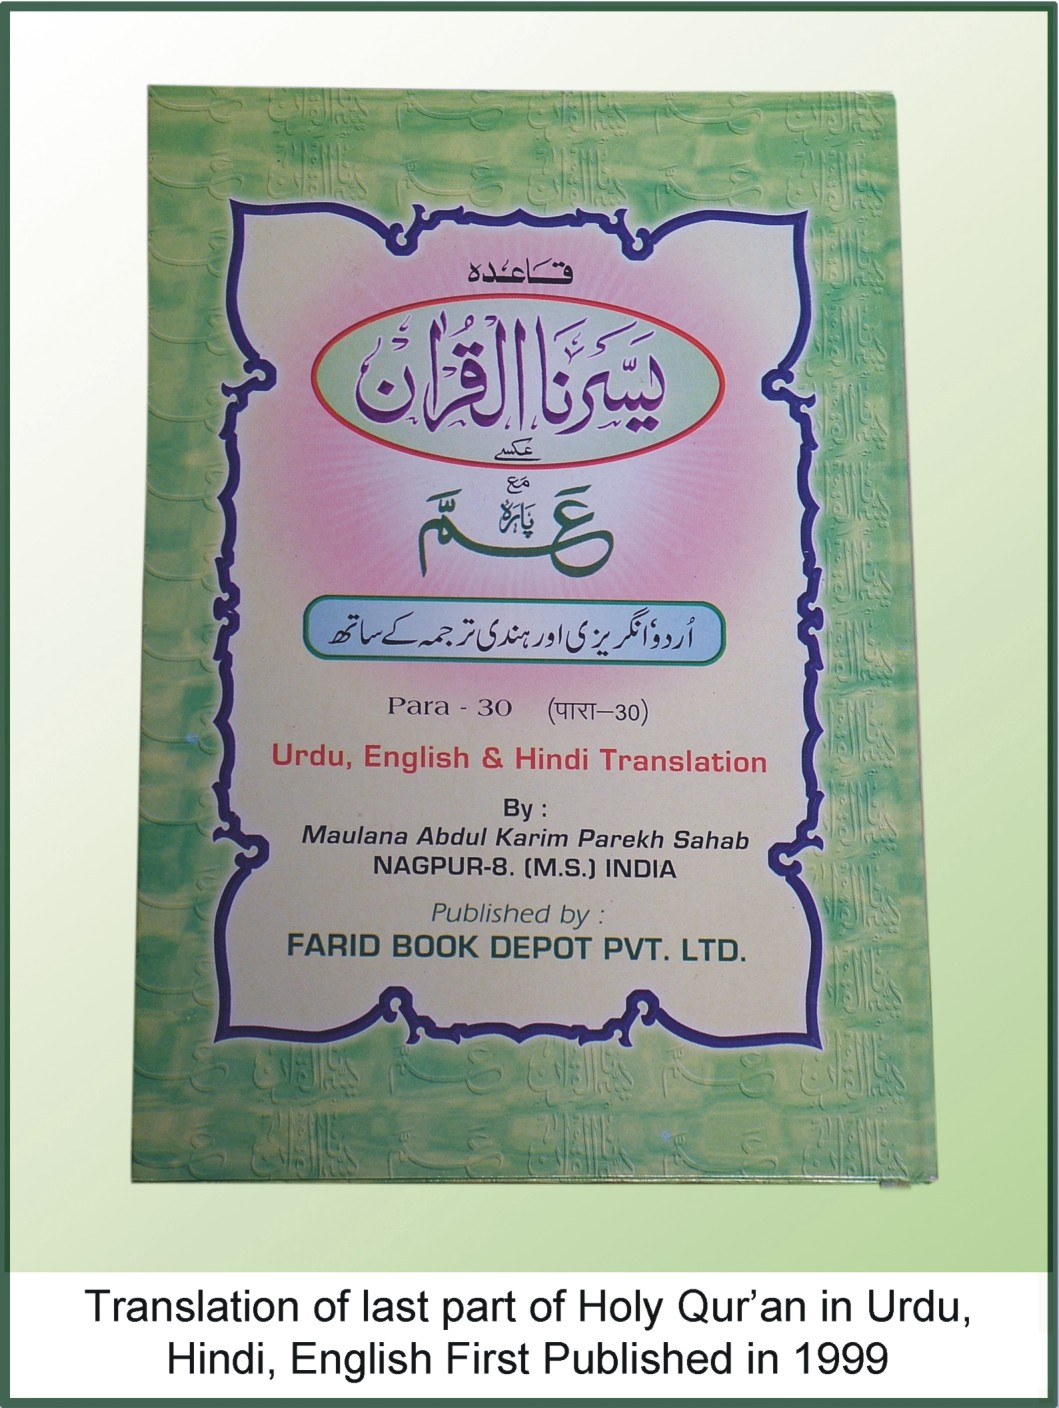 Translation of last part of The Holy Qur'an (Urdu, Hindi & English) First Published in 1999